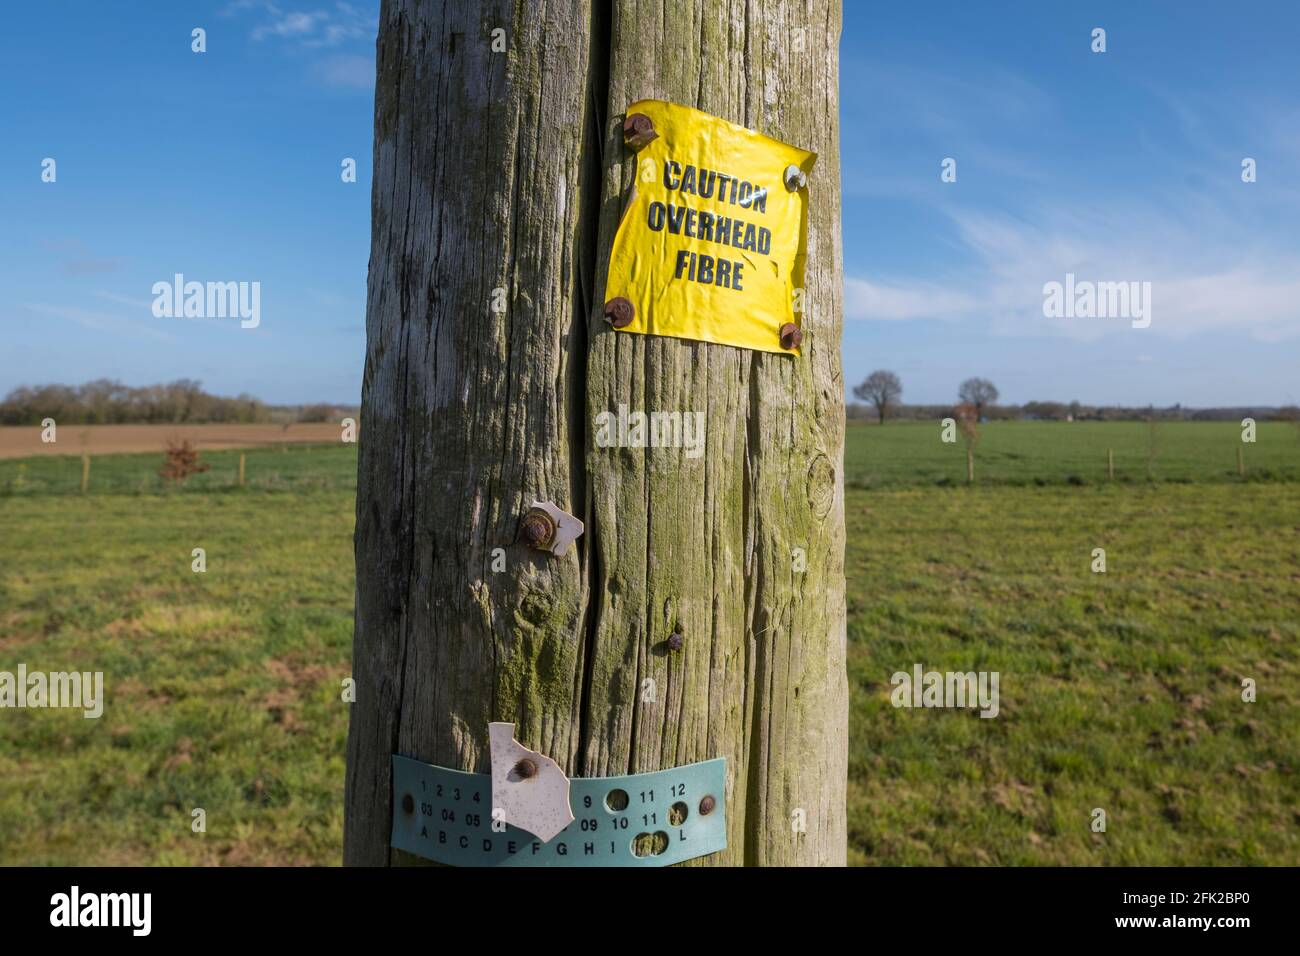 Rural broadband illustrated by a 'caution overhead fibre' sign in the Suffolk, UK country side. Stock Photo